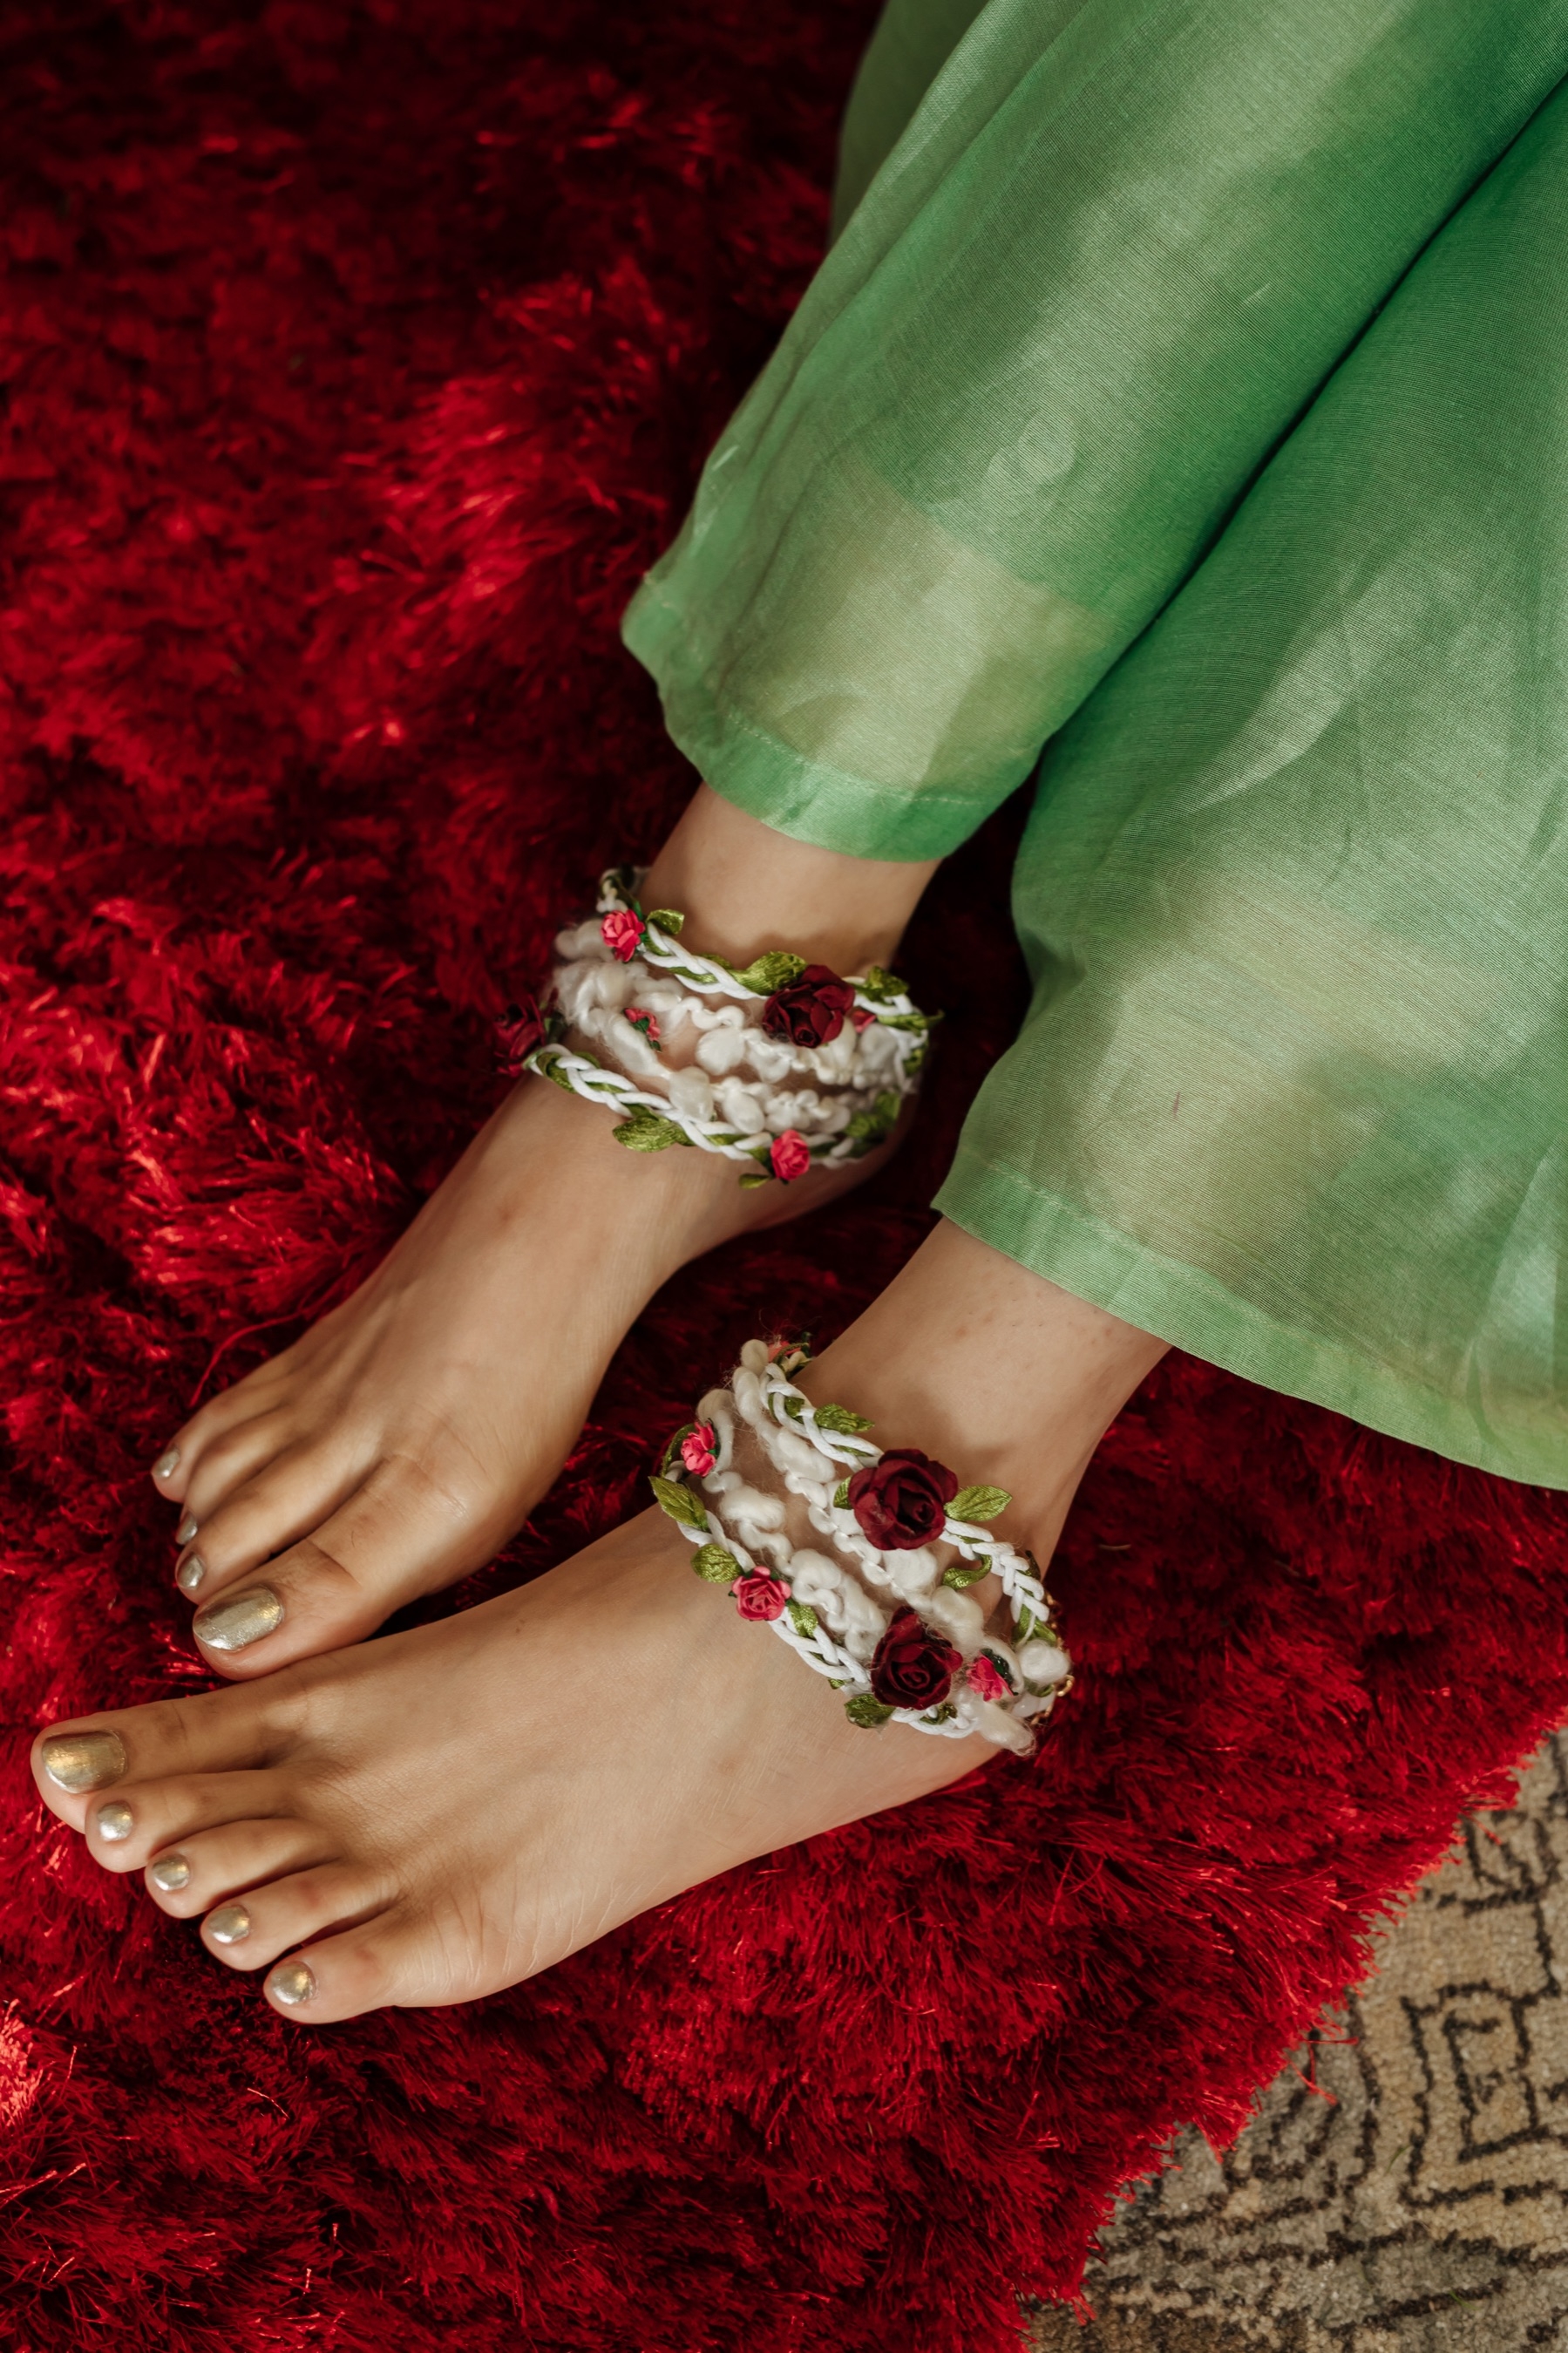 Floral art | A pair of White & Maroon Floral anklet for Women undefined